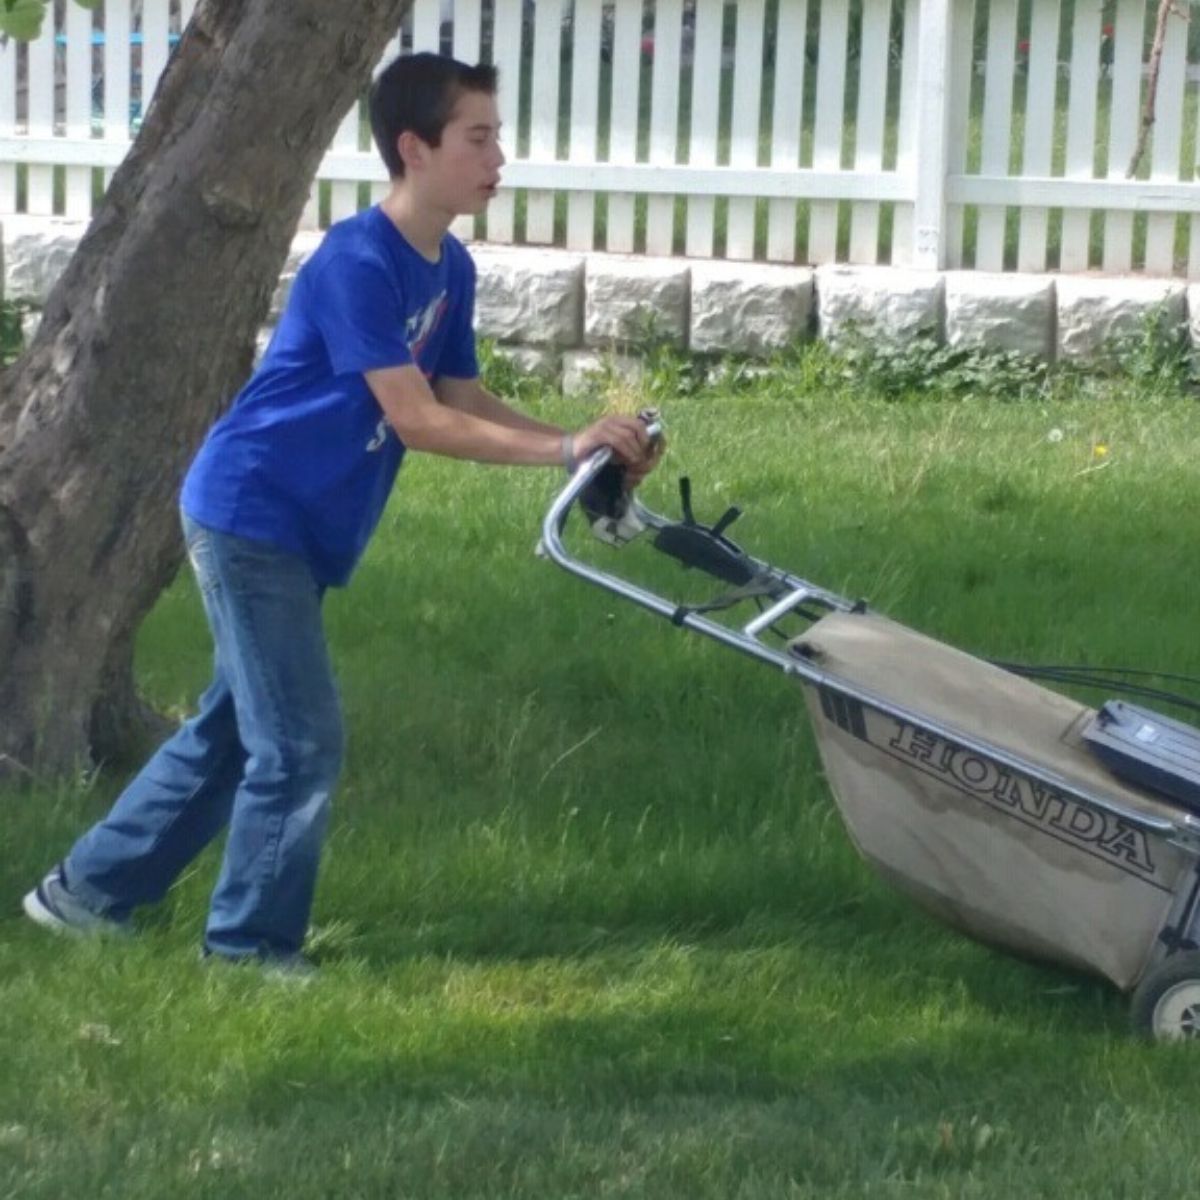 boy mowing the lawn to earn some spending money